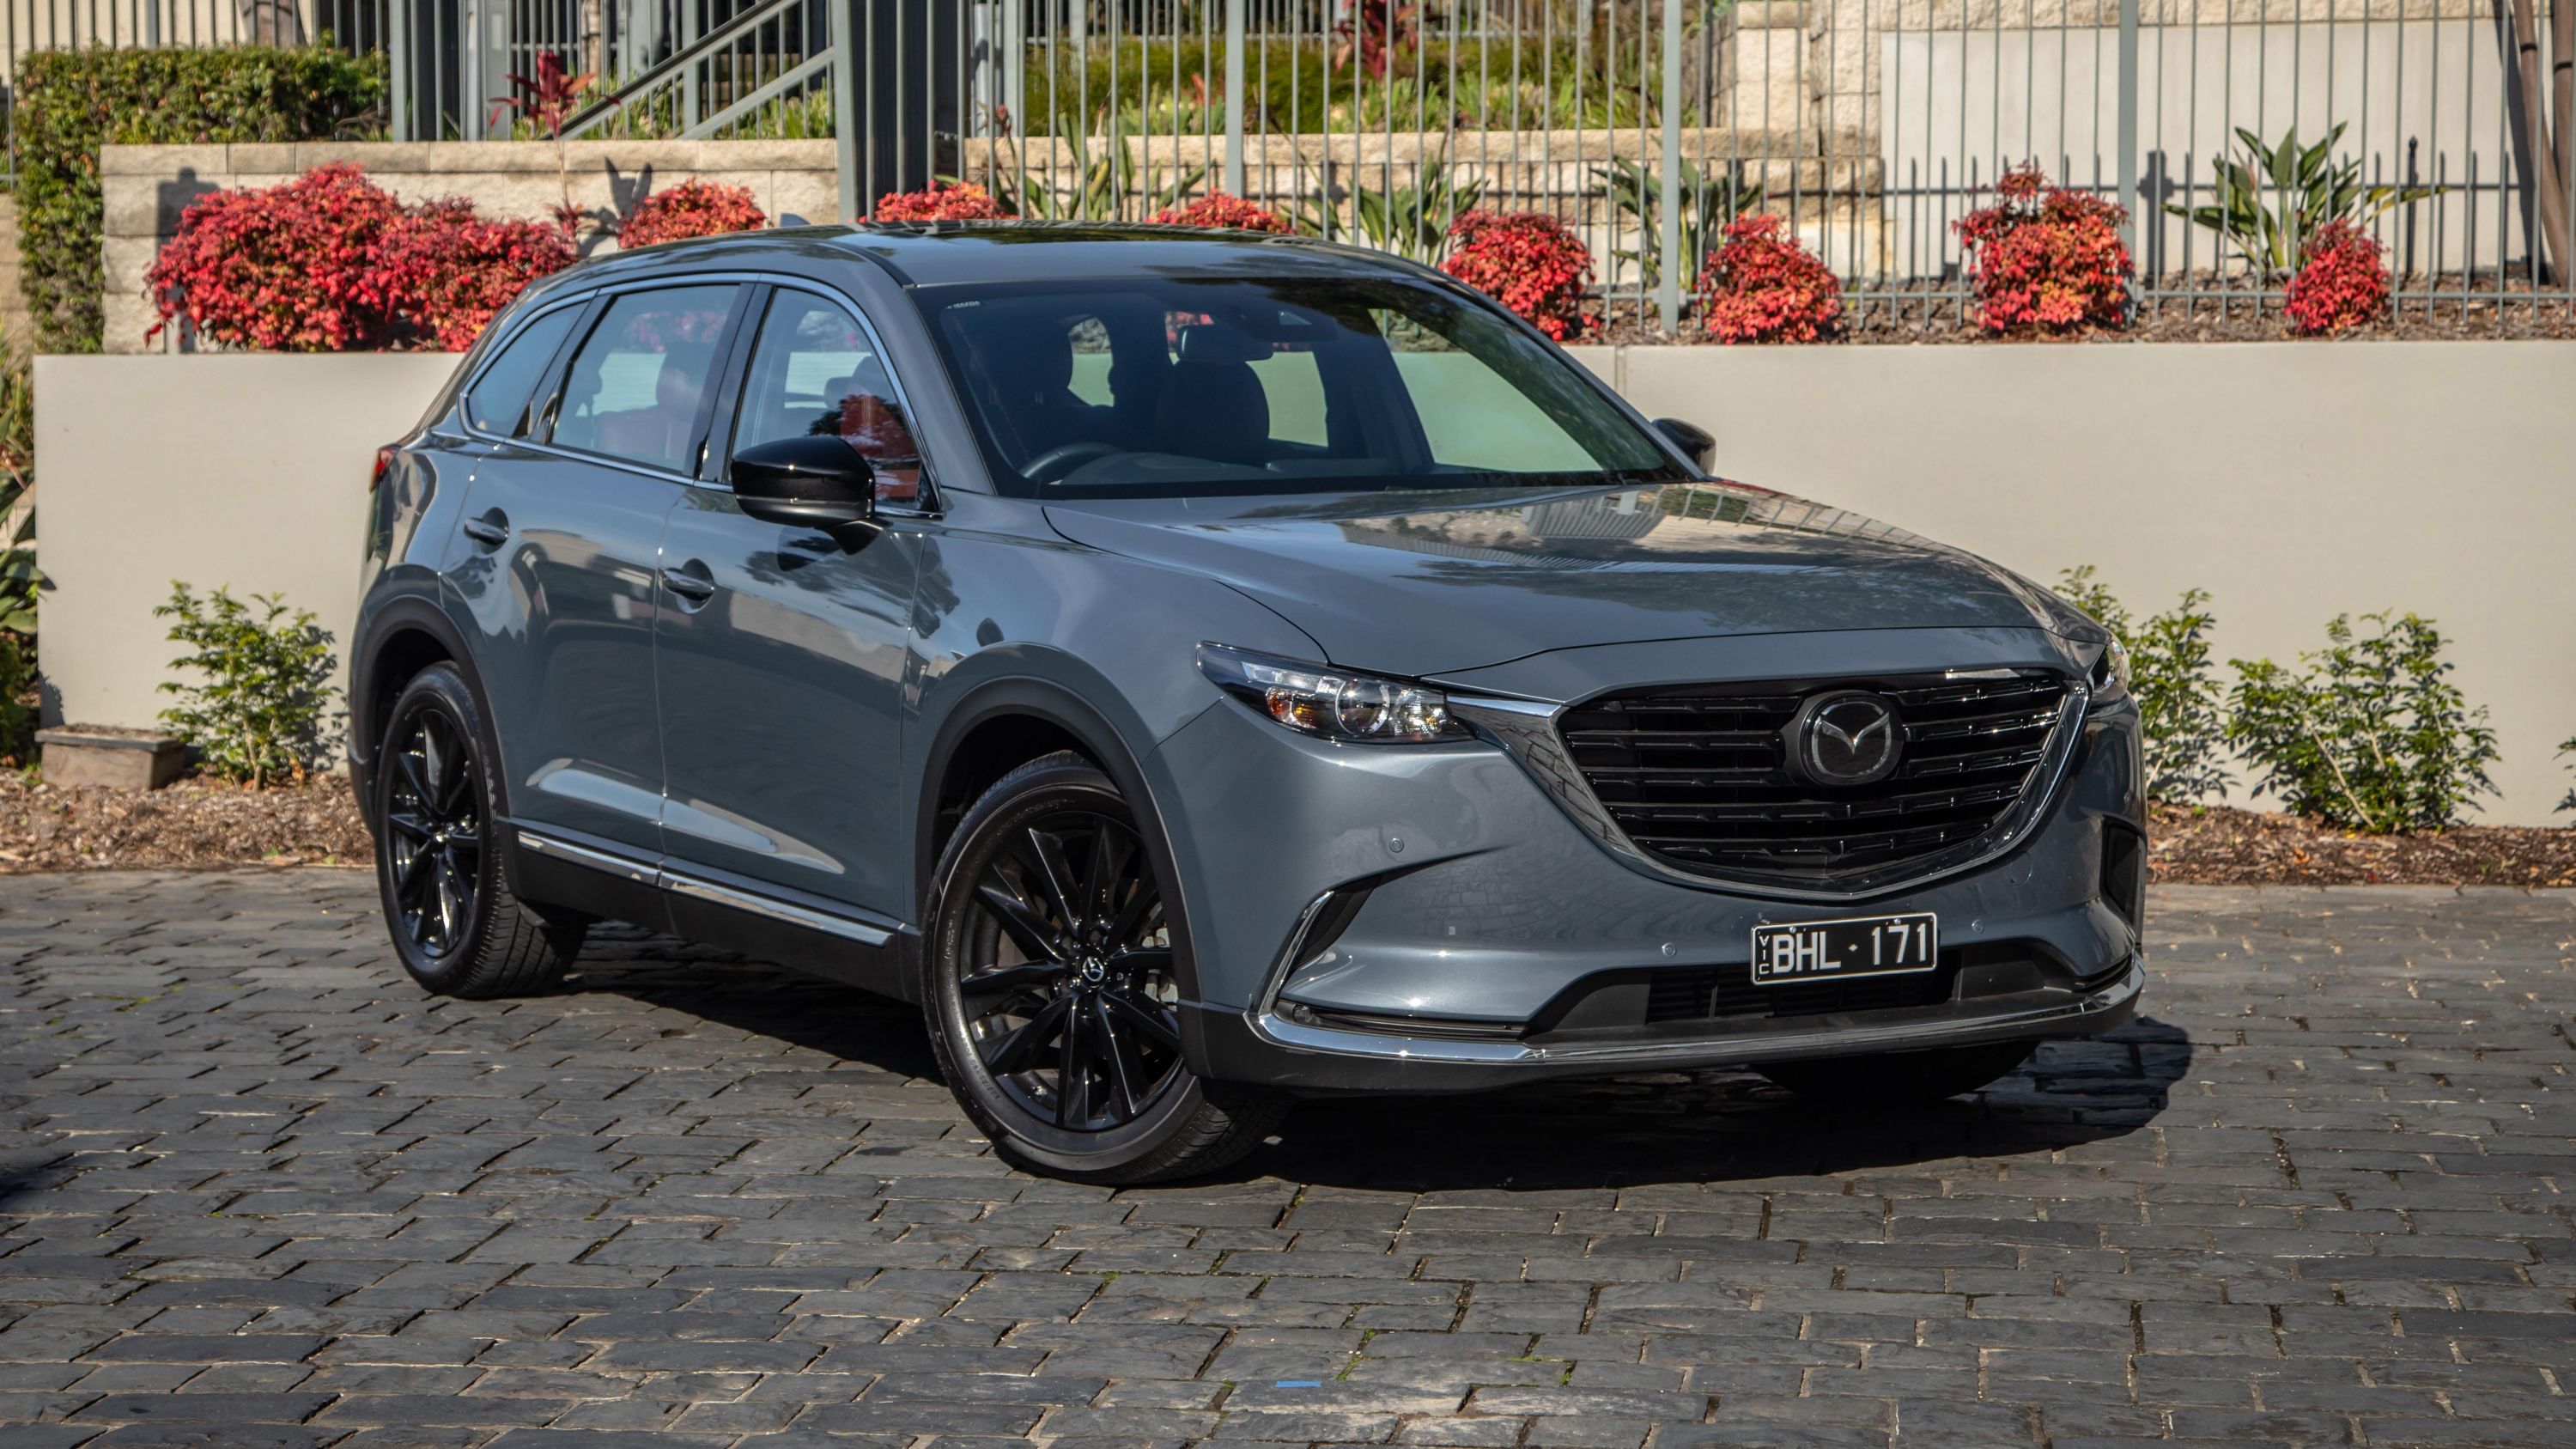 Mazda CX-90 large SUV teased again ahead of January debut | CarExpert